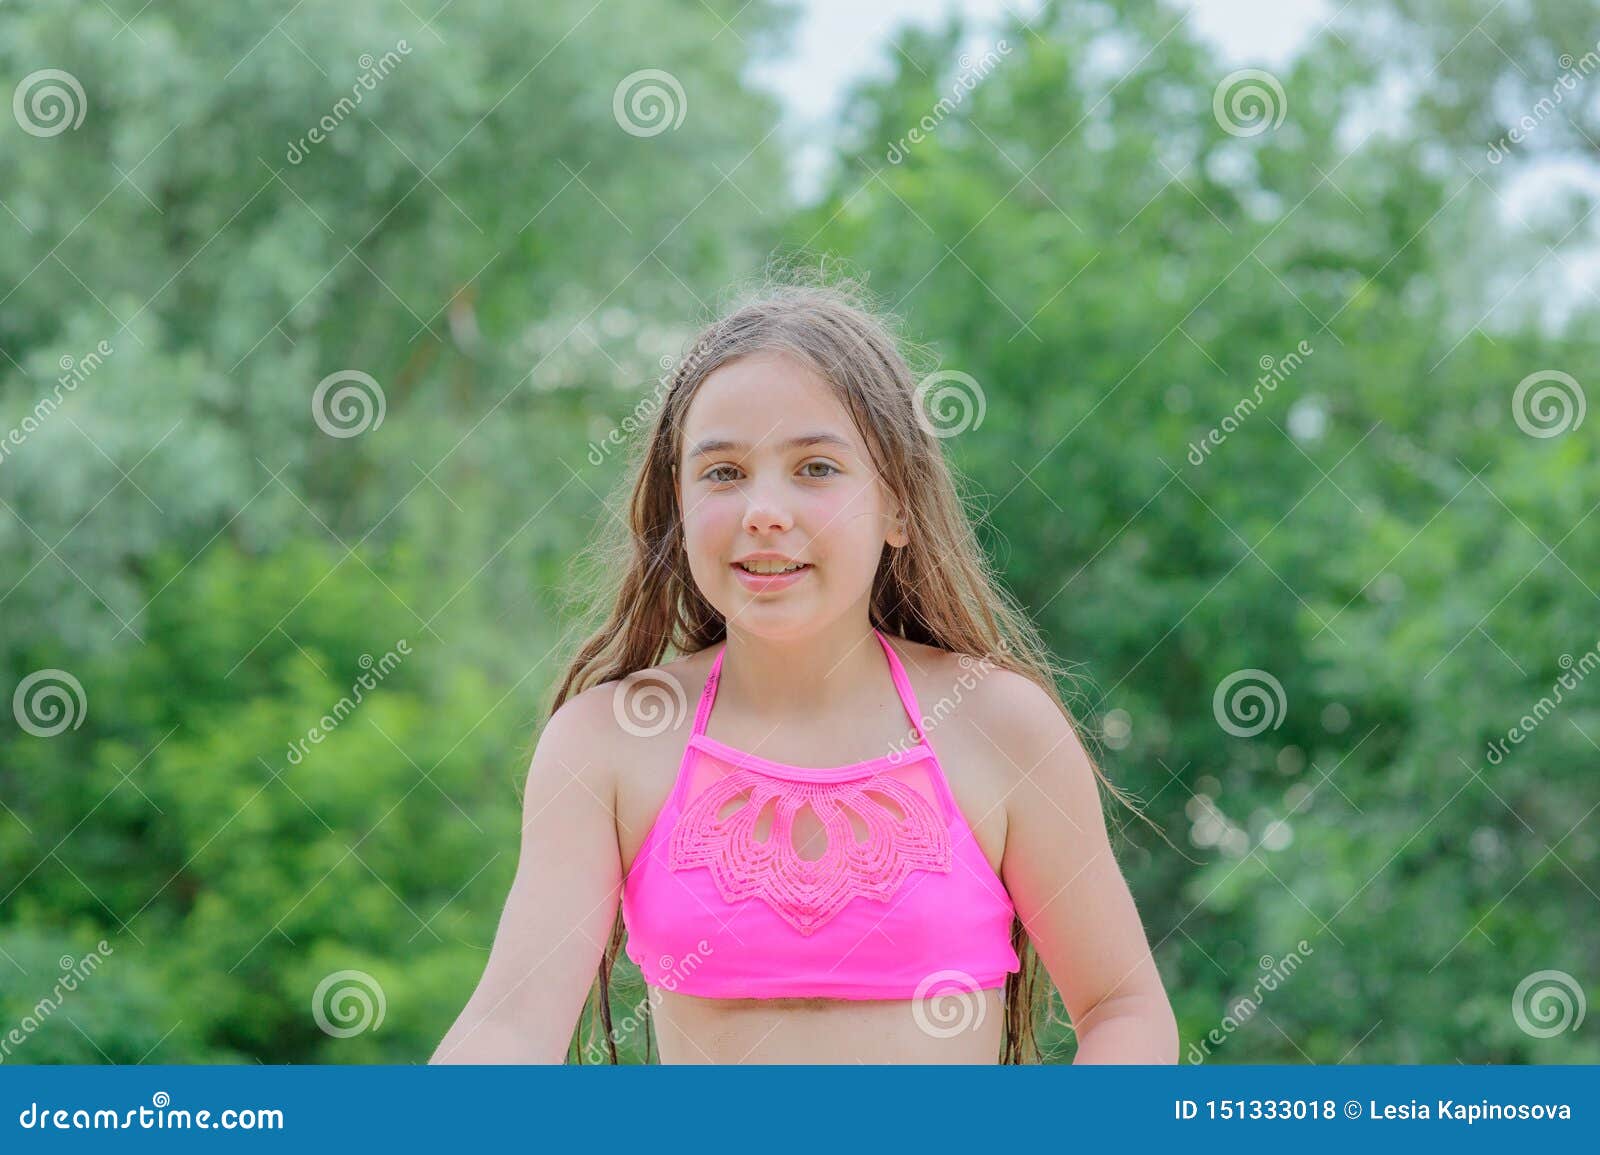 1,562 Little Girl Bathing Suit Stock Photos Free Royalty-Free Stock ...